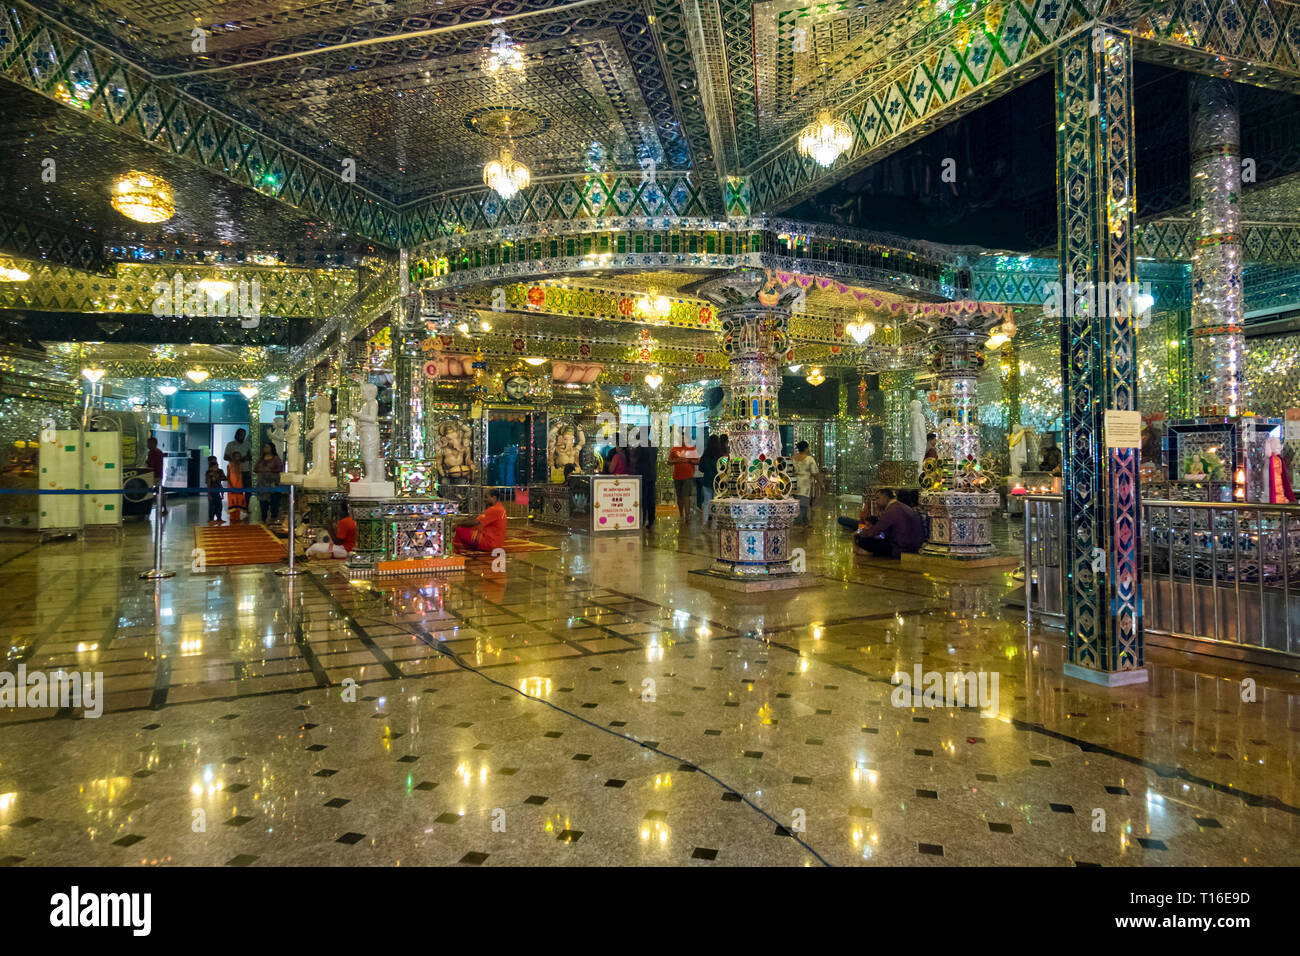 The unique Arulmigu Sri Rajakaliamman Glass Temple in Johor Bahru,  Malaysia. The interior is completely covered in glass tiles. Interior and  praying Stock Photo - Alamy